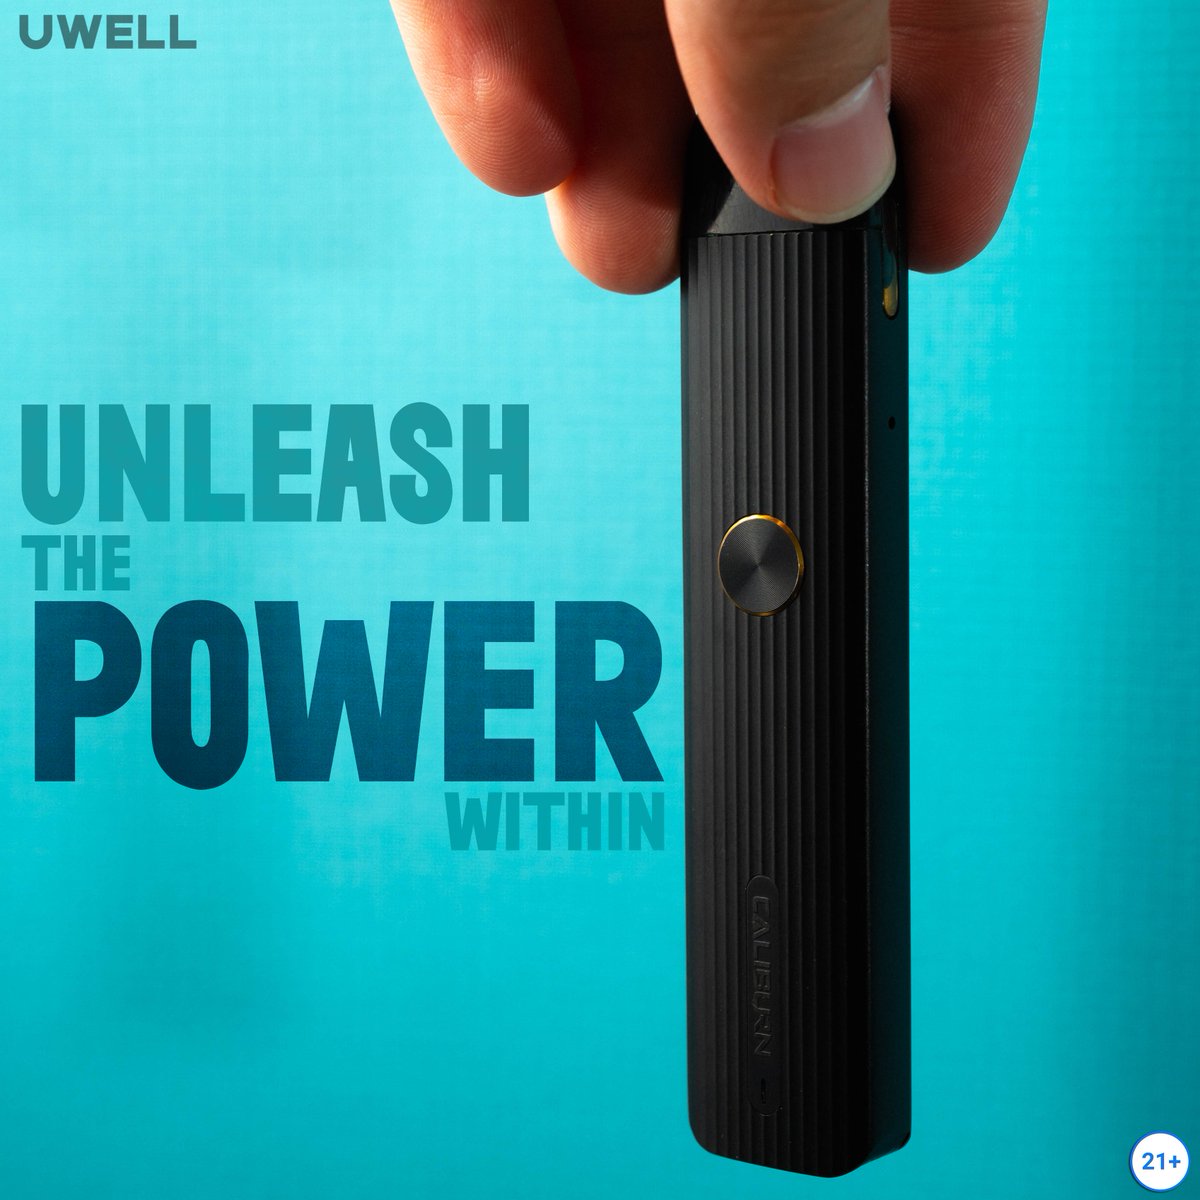 𝐒𝐨𝐦𝐞𝐭𝐡𝐢𝐧𝐠 𝐚𝐦𝐚𝐳𝐢𝐧𝐠 𝐟𝐨𝐫 𝐲𝐚🤭

The 690mAh🔋 capacity Caliburn G comes with 2ml e-juice capacity offering 18W of power⚡️🥰

#uwell #myuwell #caliburn #caliburn2 #caliburng #podmod #vaping #vapingsavedmylife 

Enjoy!